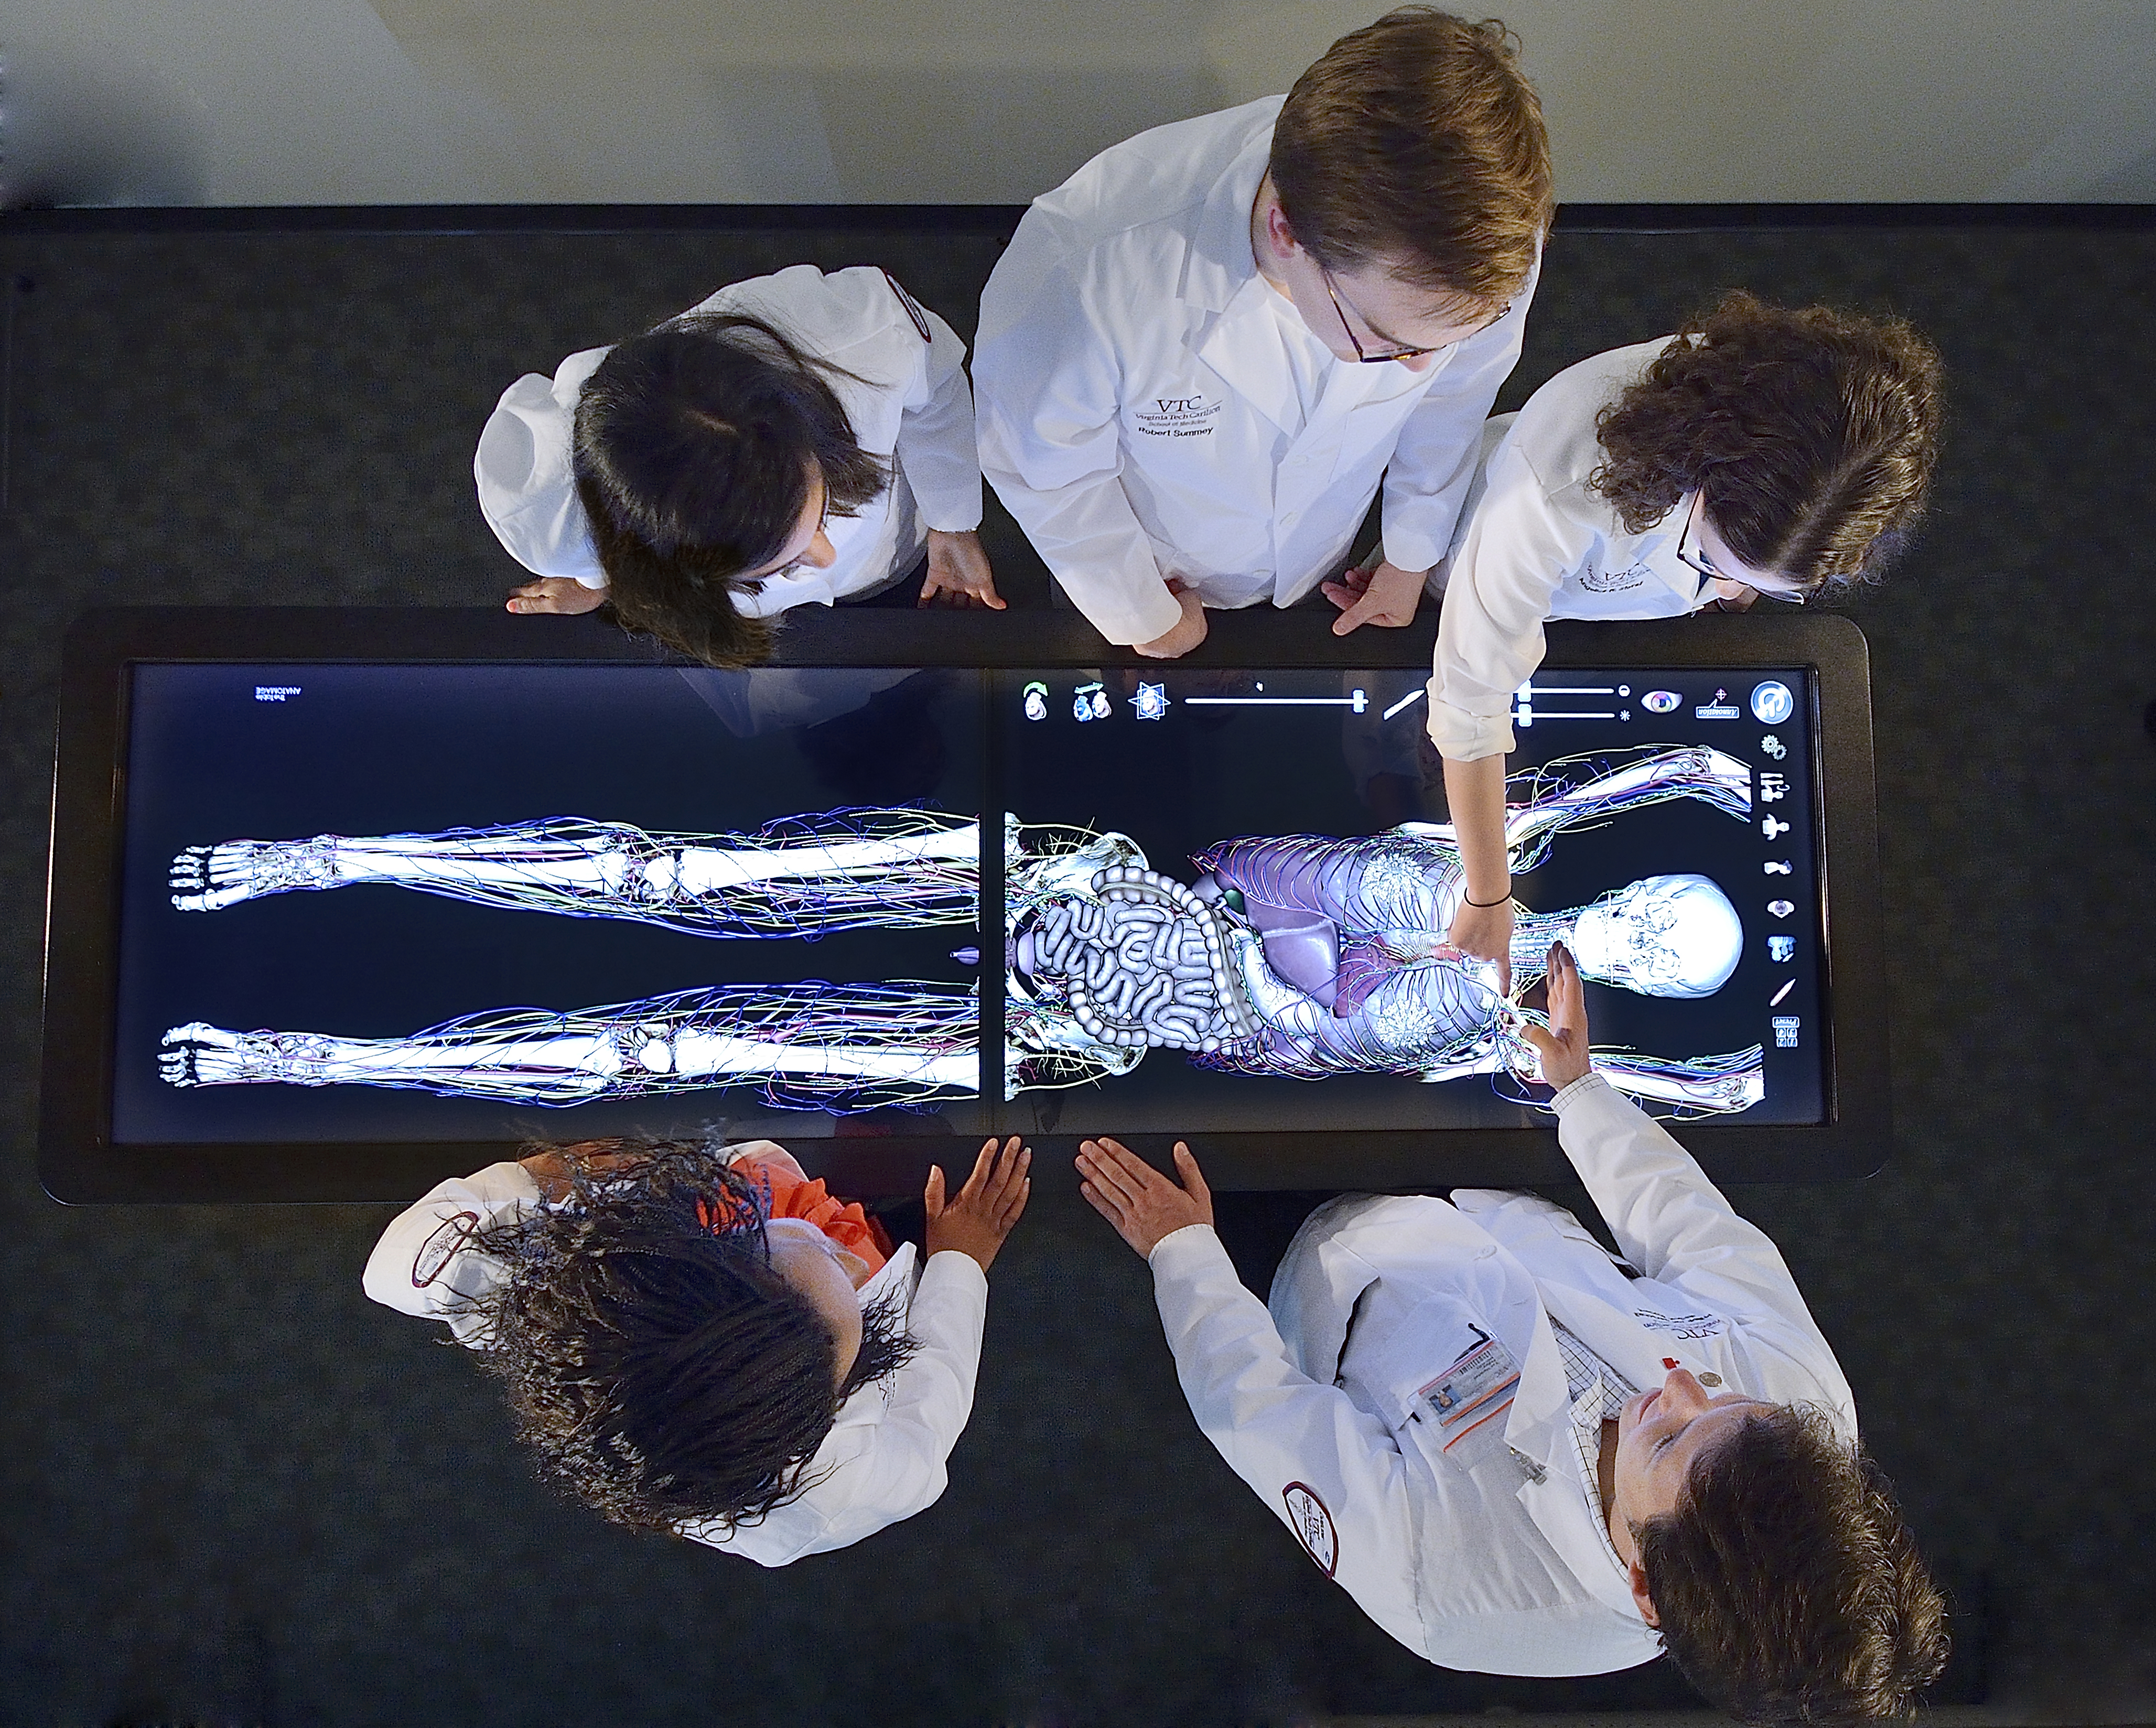 Participants in the Mini Medical School will have a chance to try imaging with portable ultrasound equipment, among other hands-on activities. 